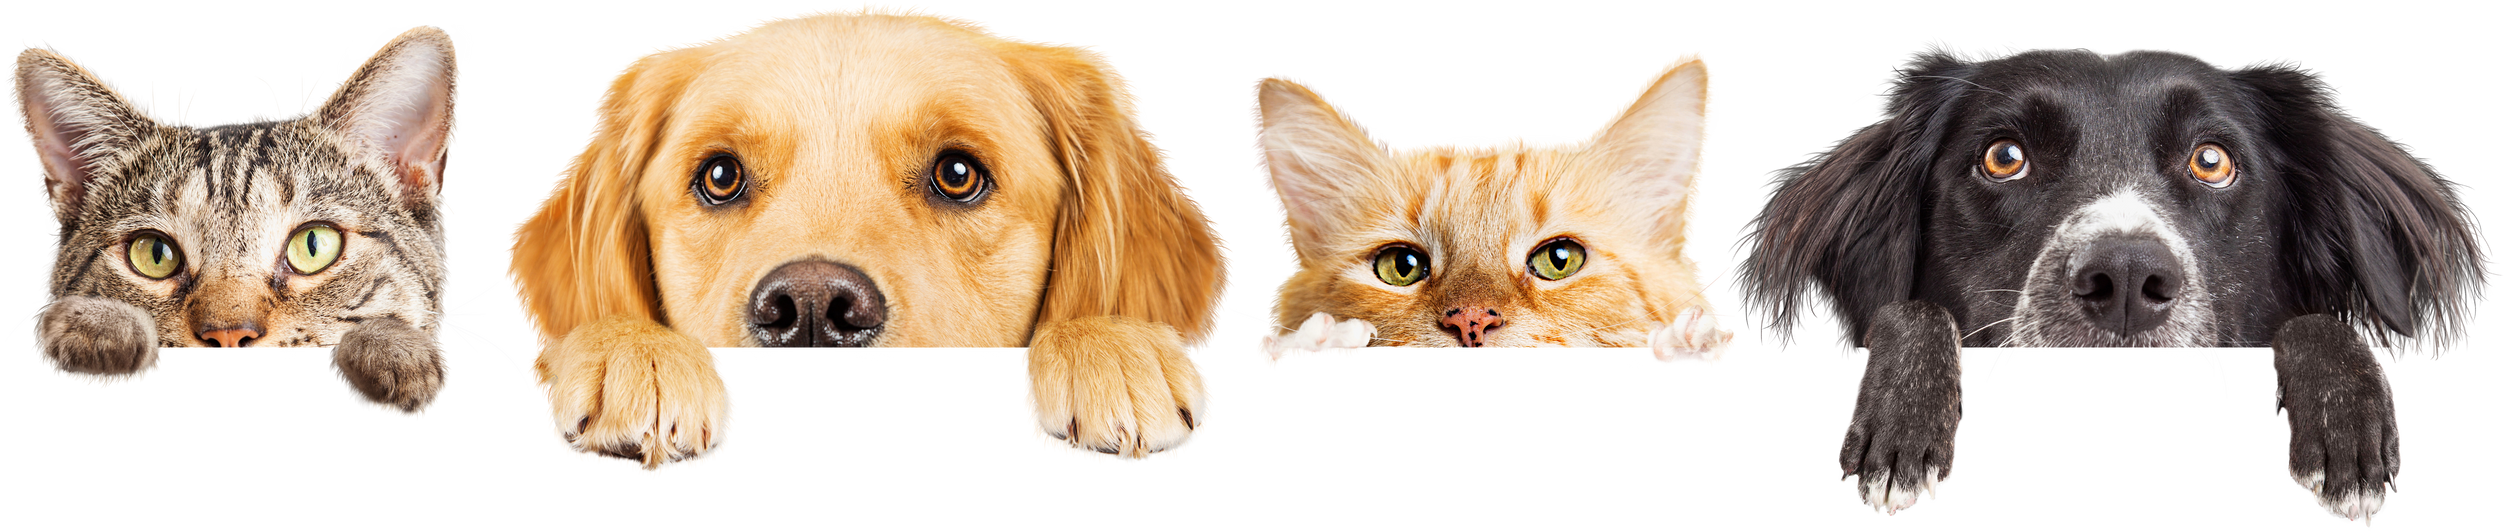 Dogs and Cats Peeking over Web Banner Extracted